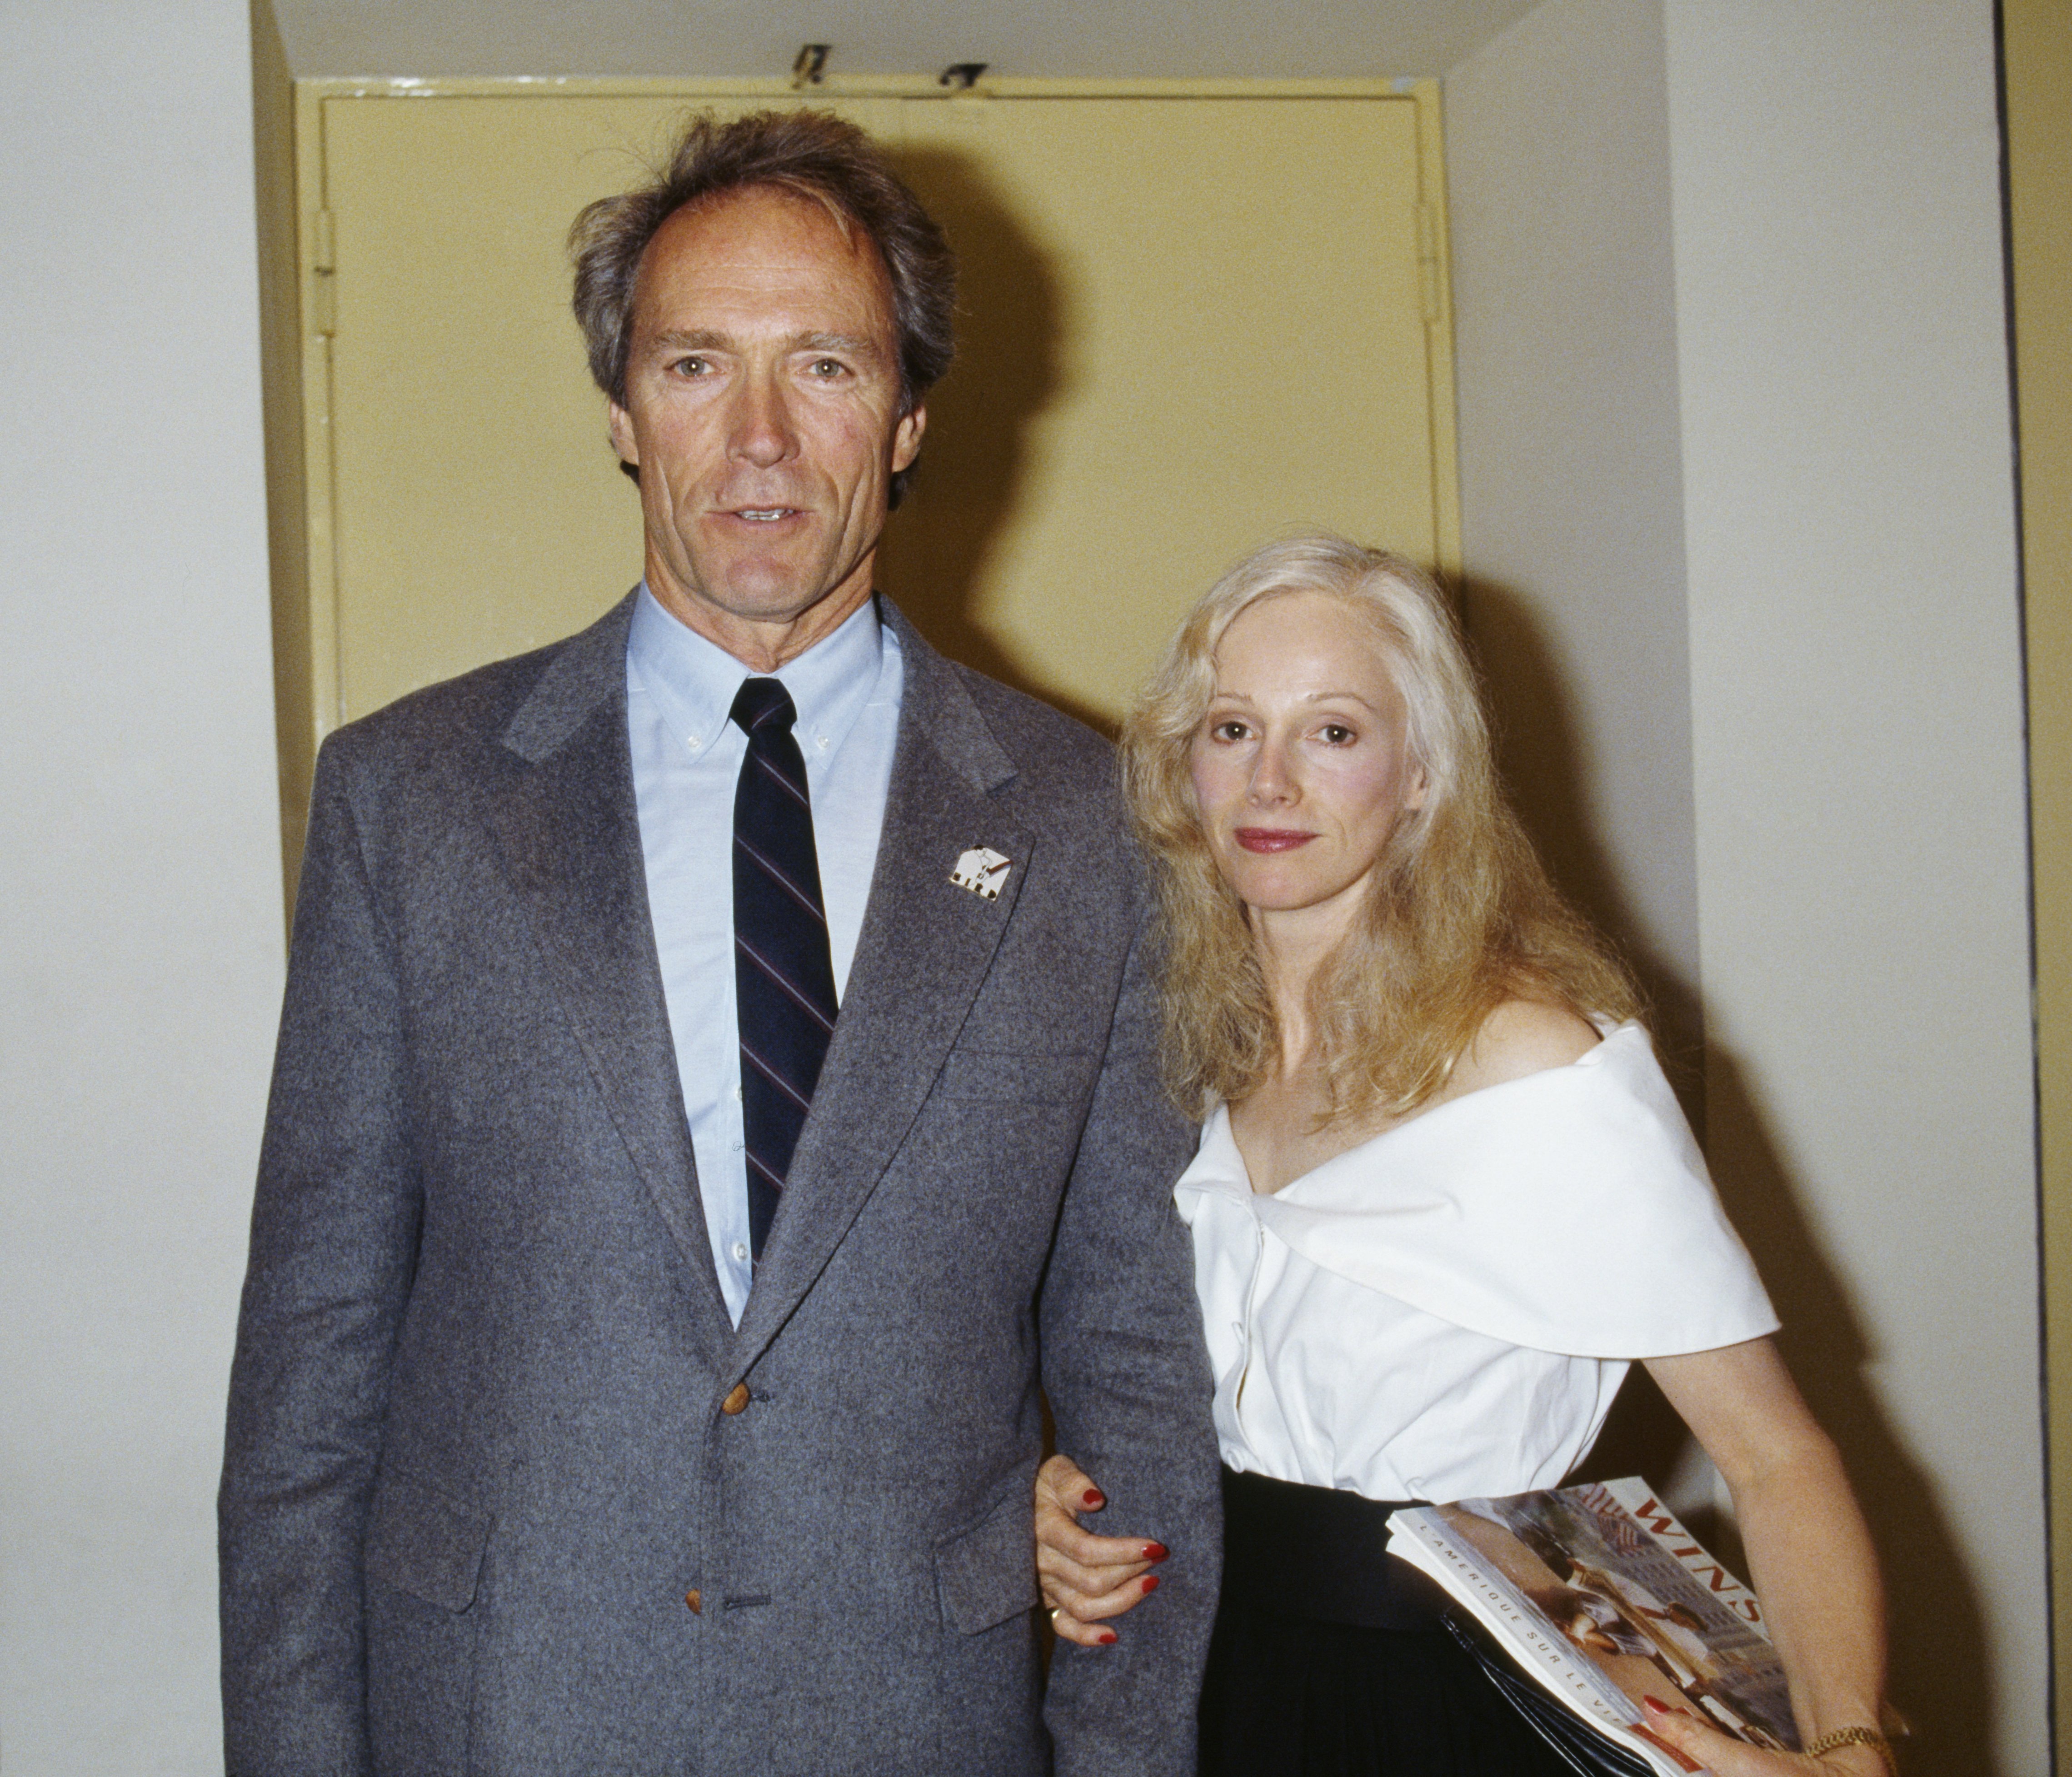 Clint Eastwood and Sondra Locke attend the premiere of his movie "Bird", a biography of jazz musician Charlie Parker, at the Cinémathèque de Paris on May 24, 1988. | Source: Getty Images